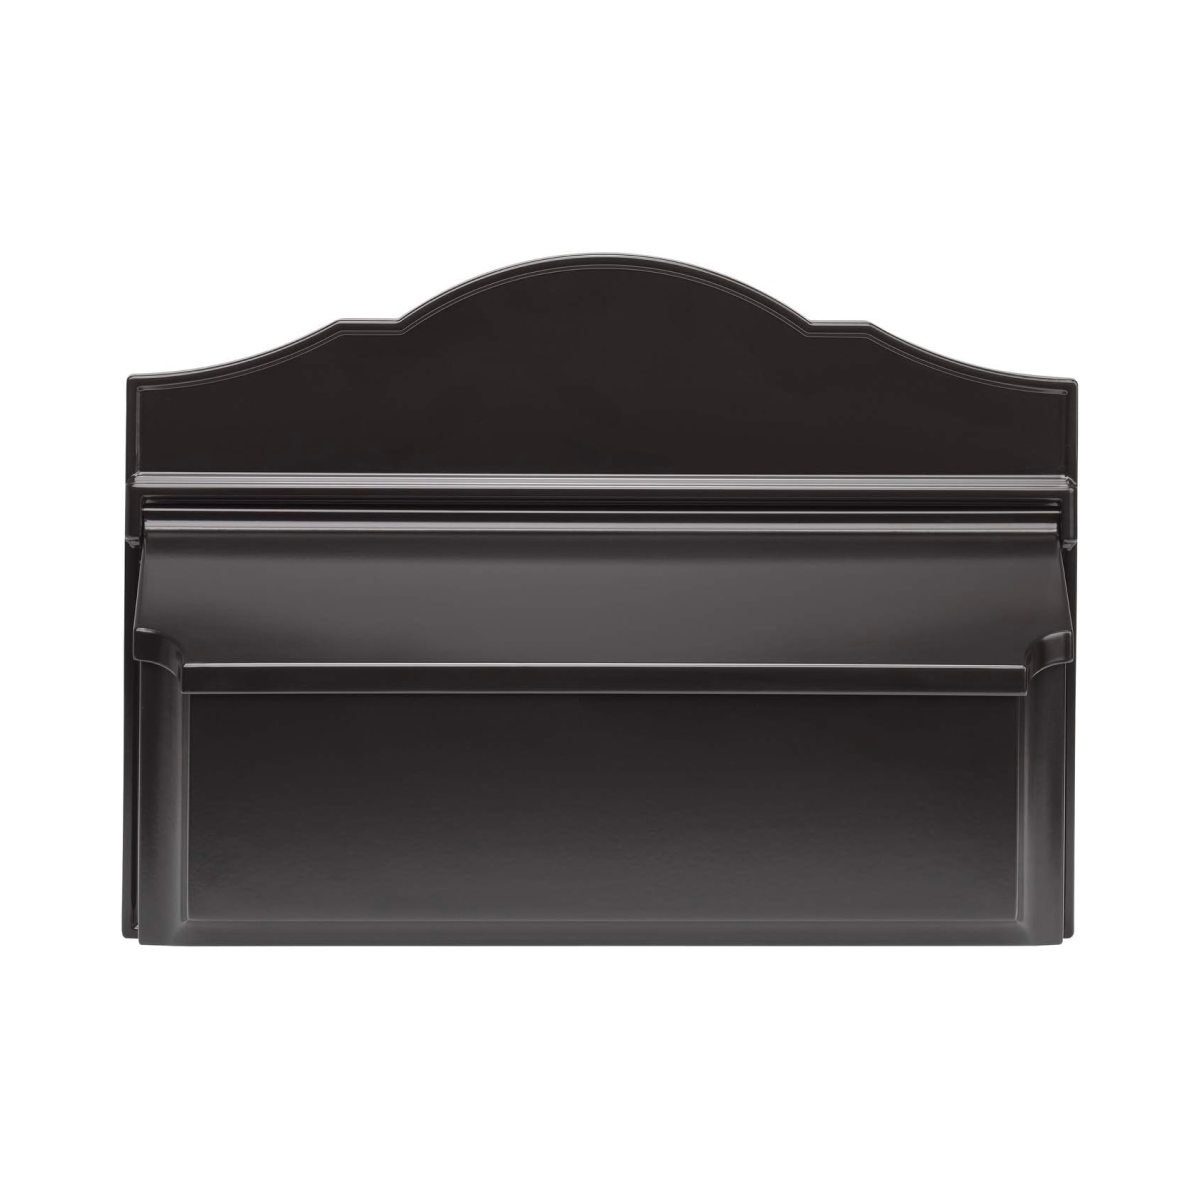 Whitehall Colonial Wall Mount Mailbox Product Image